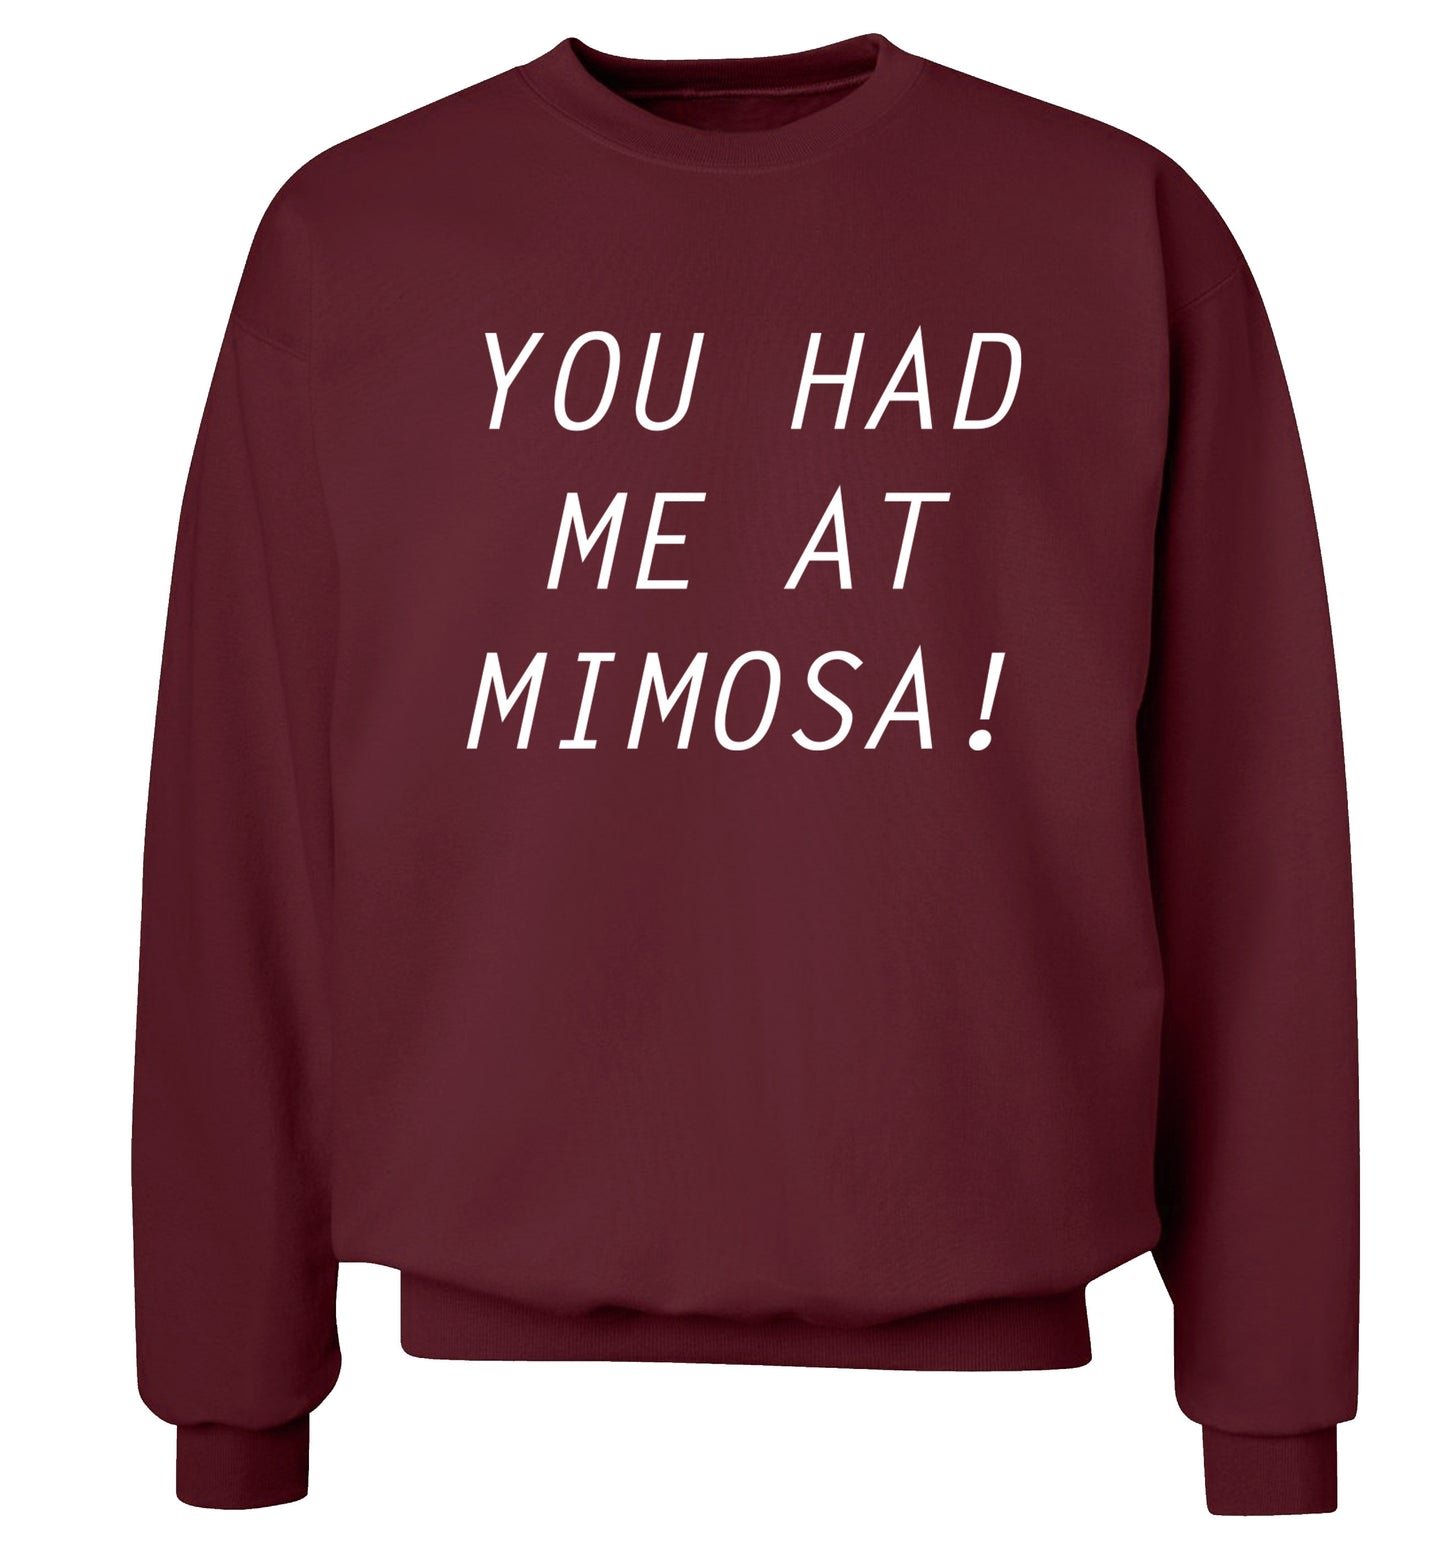 You had me at mimosa Adult's unisex maroon Sweater 2XL